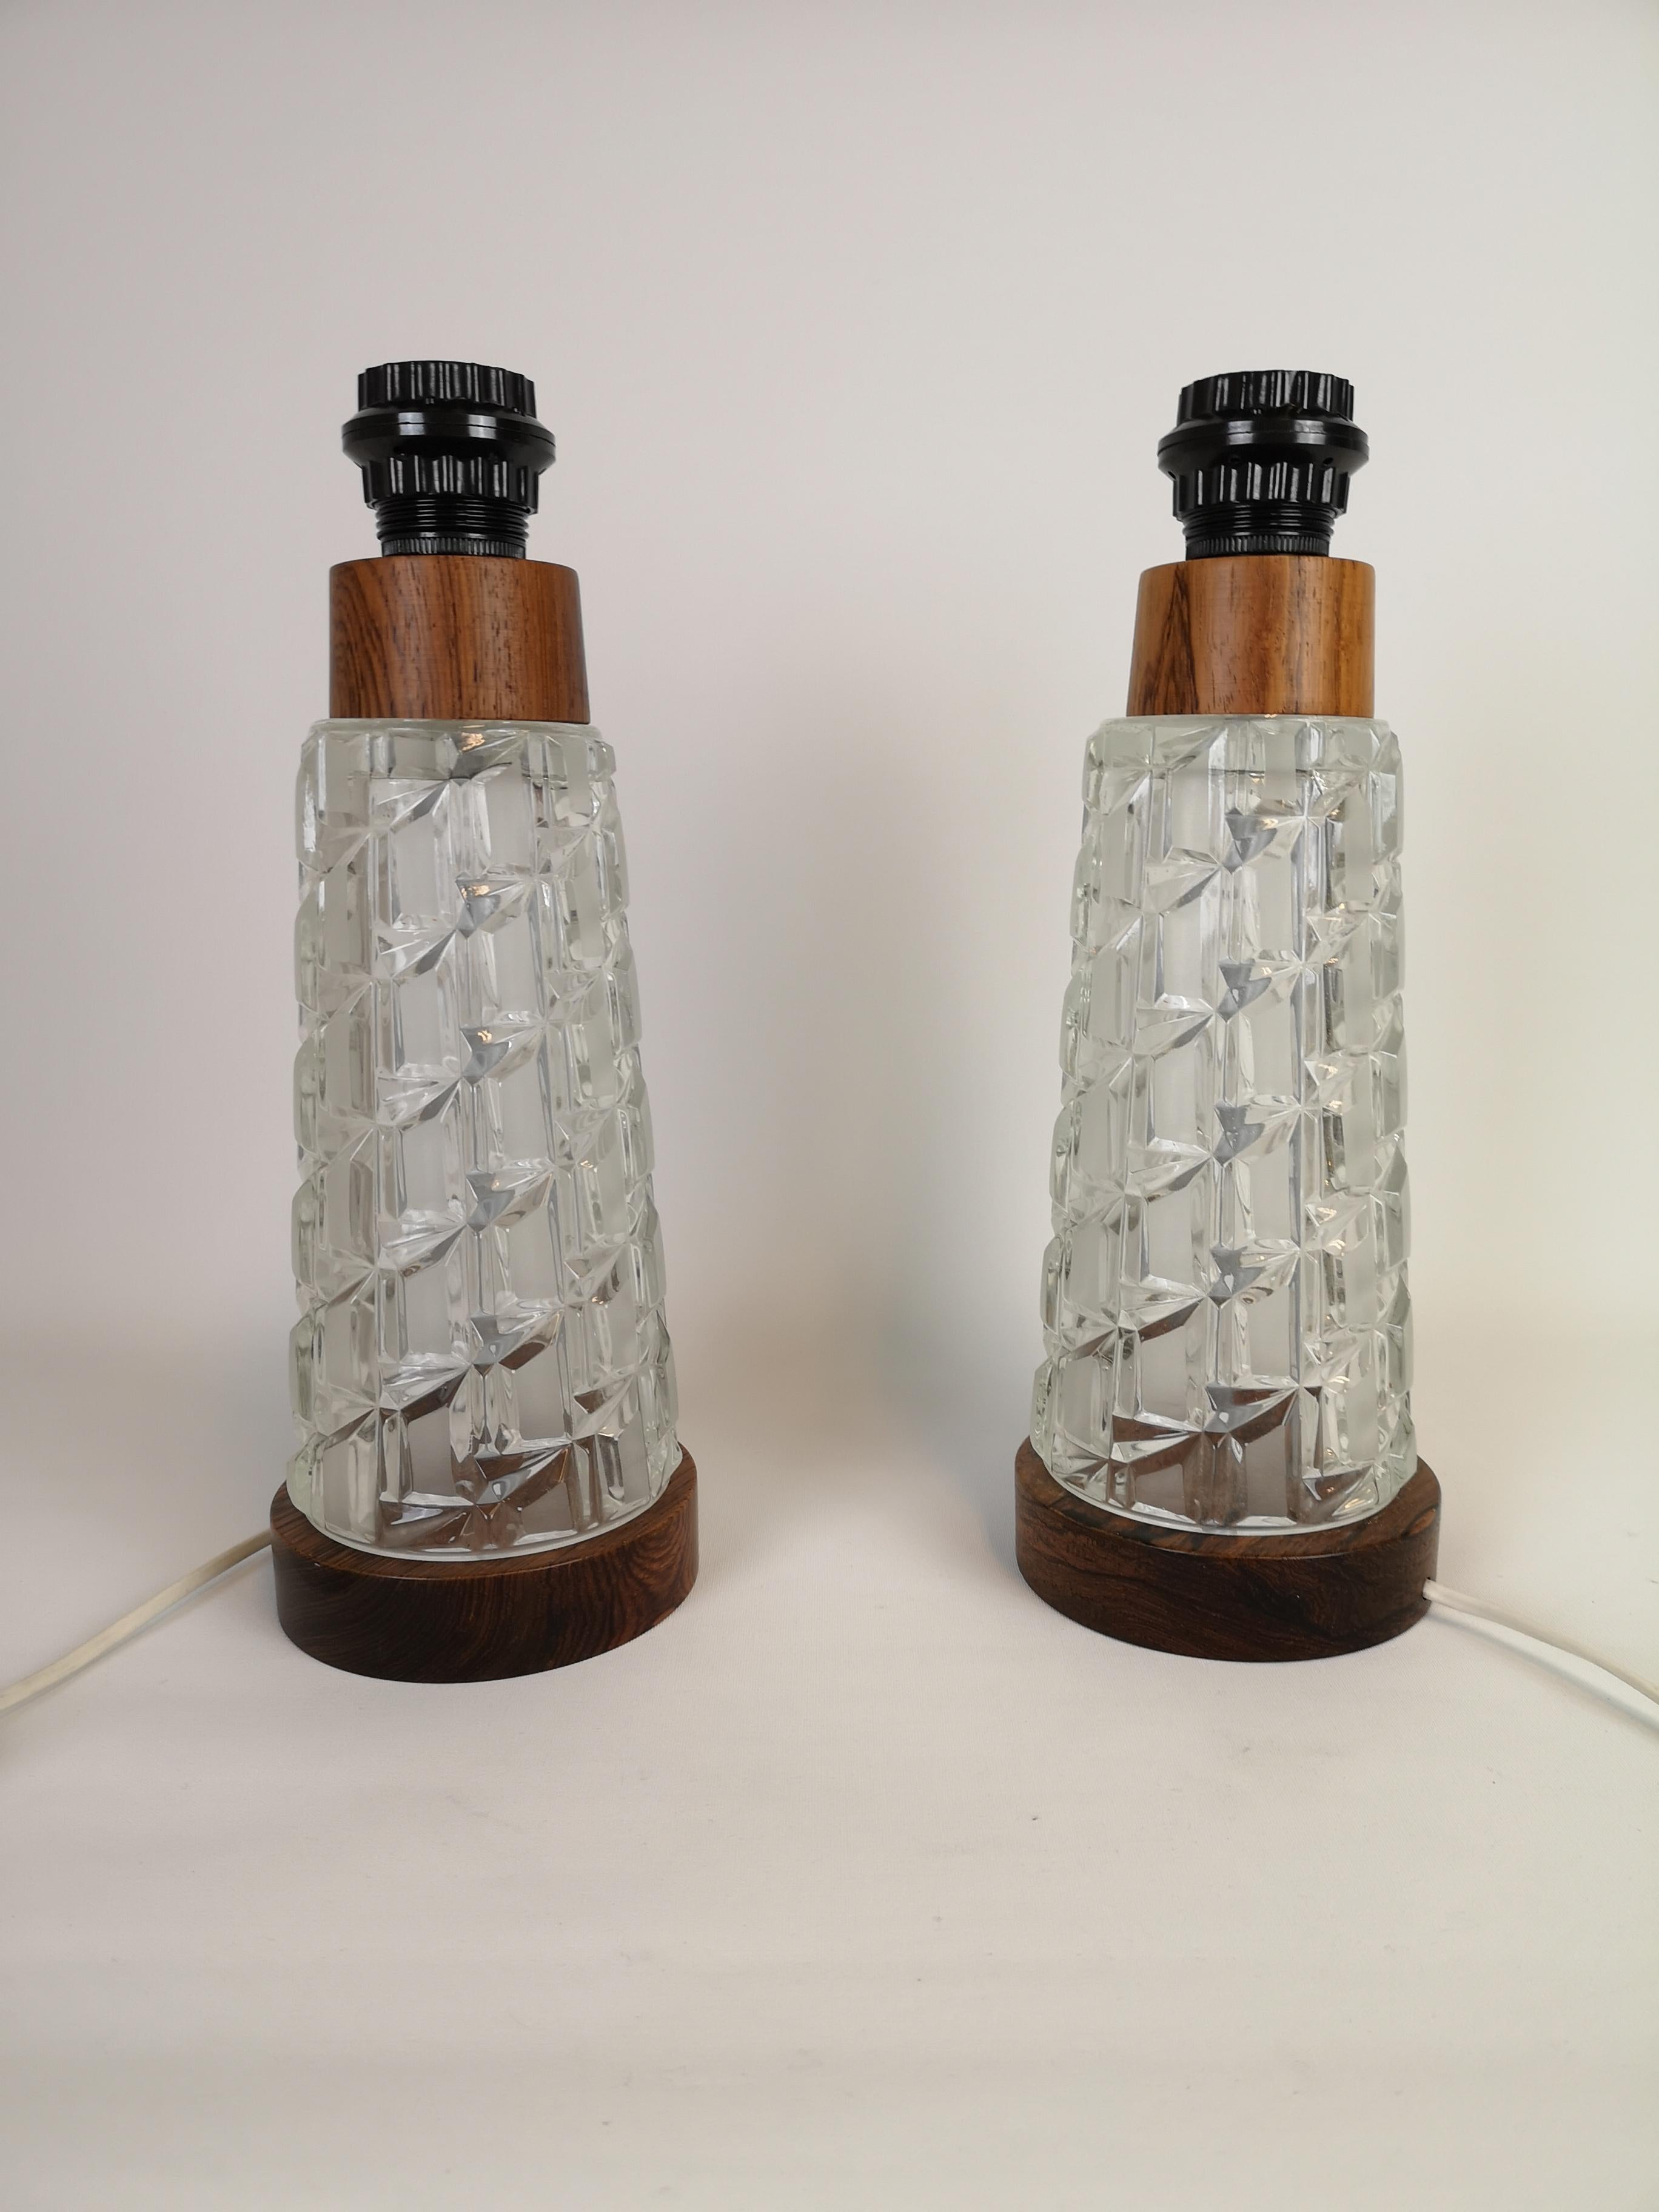 Midcentury Table Lamps Orrefors Teak and Glass Sweden 1